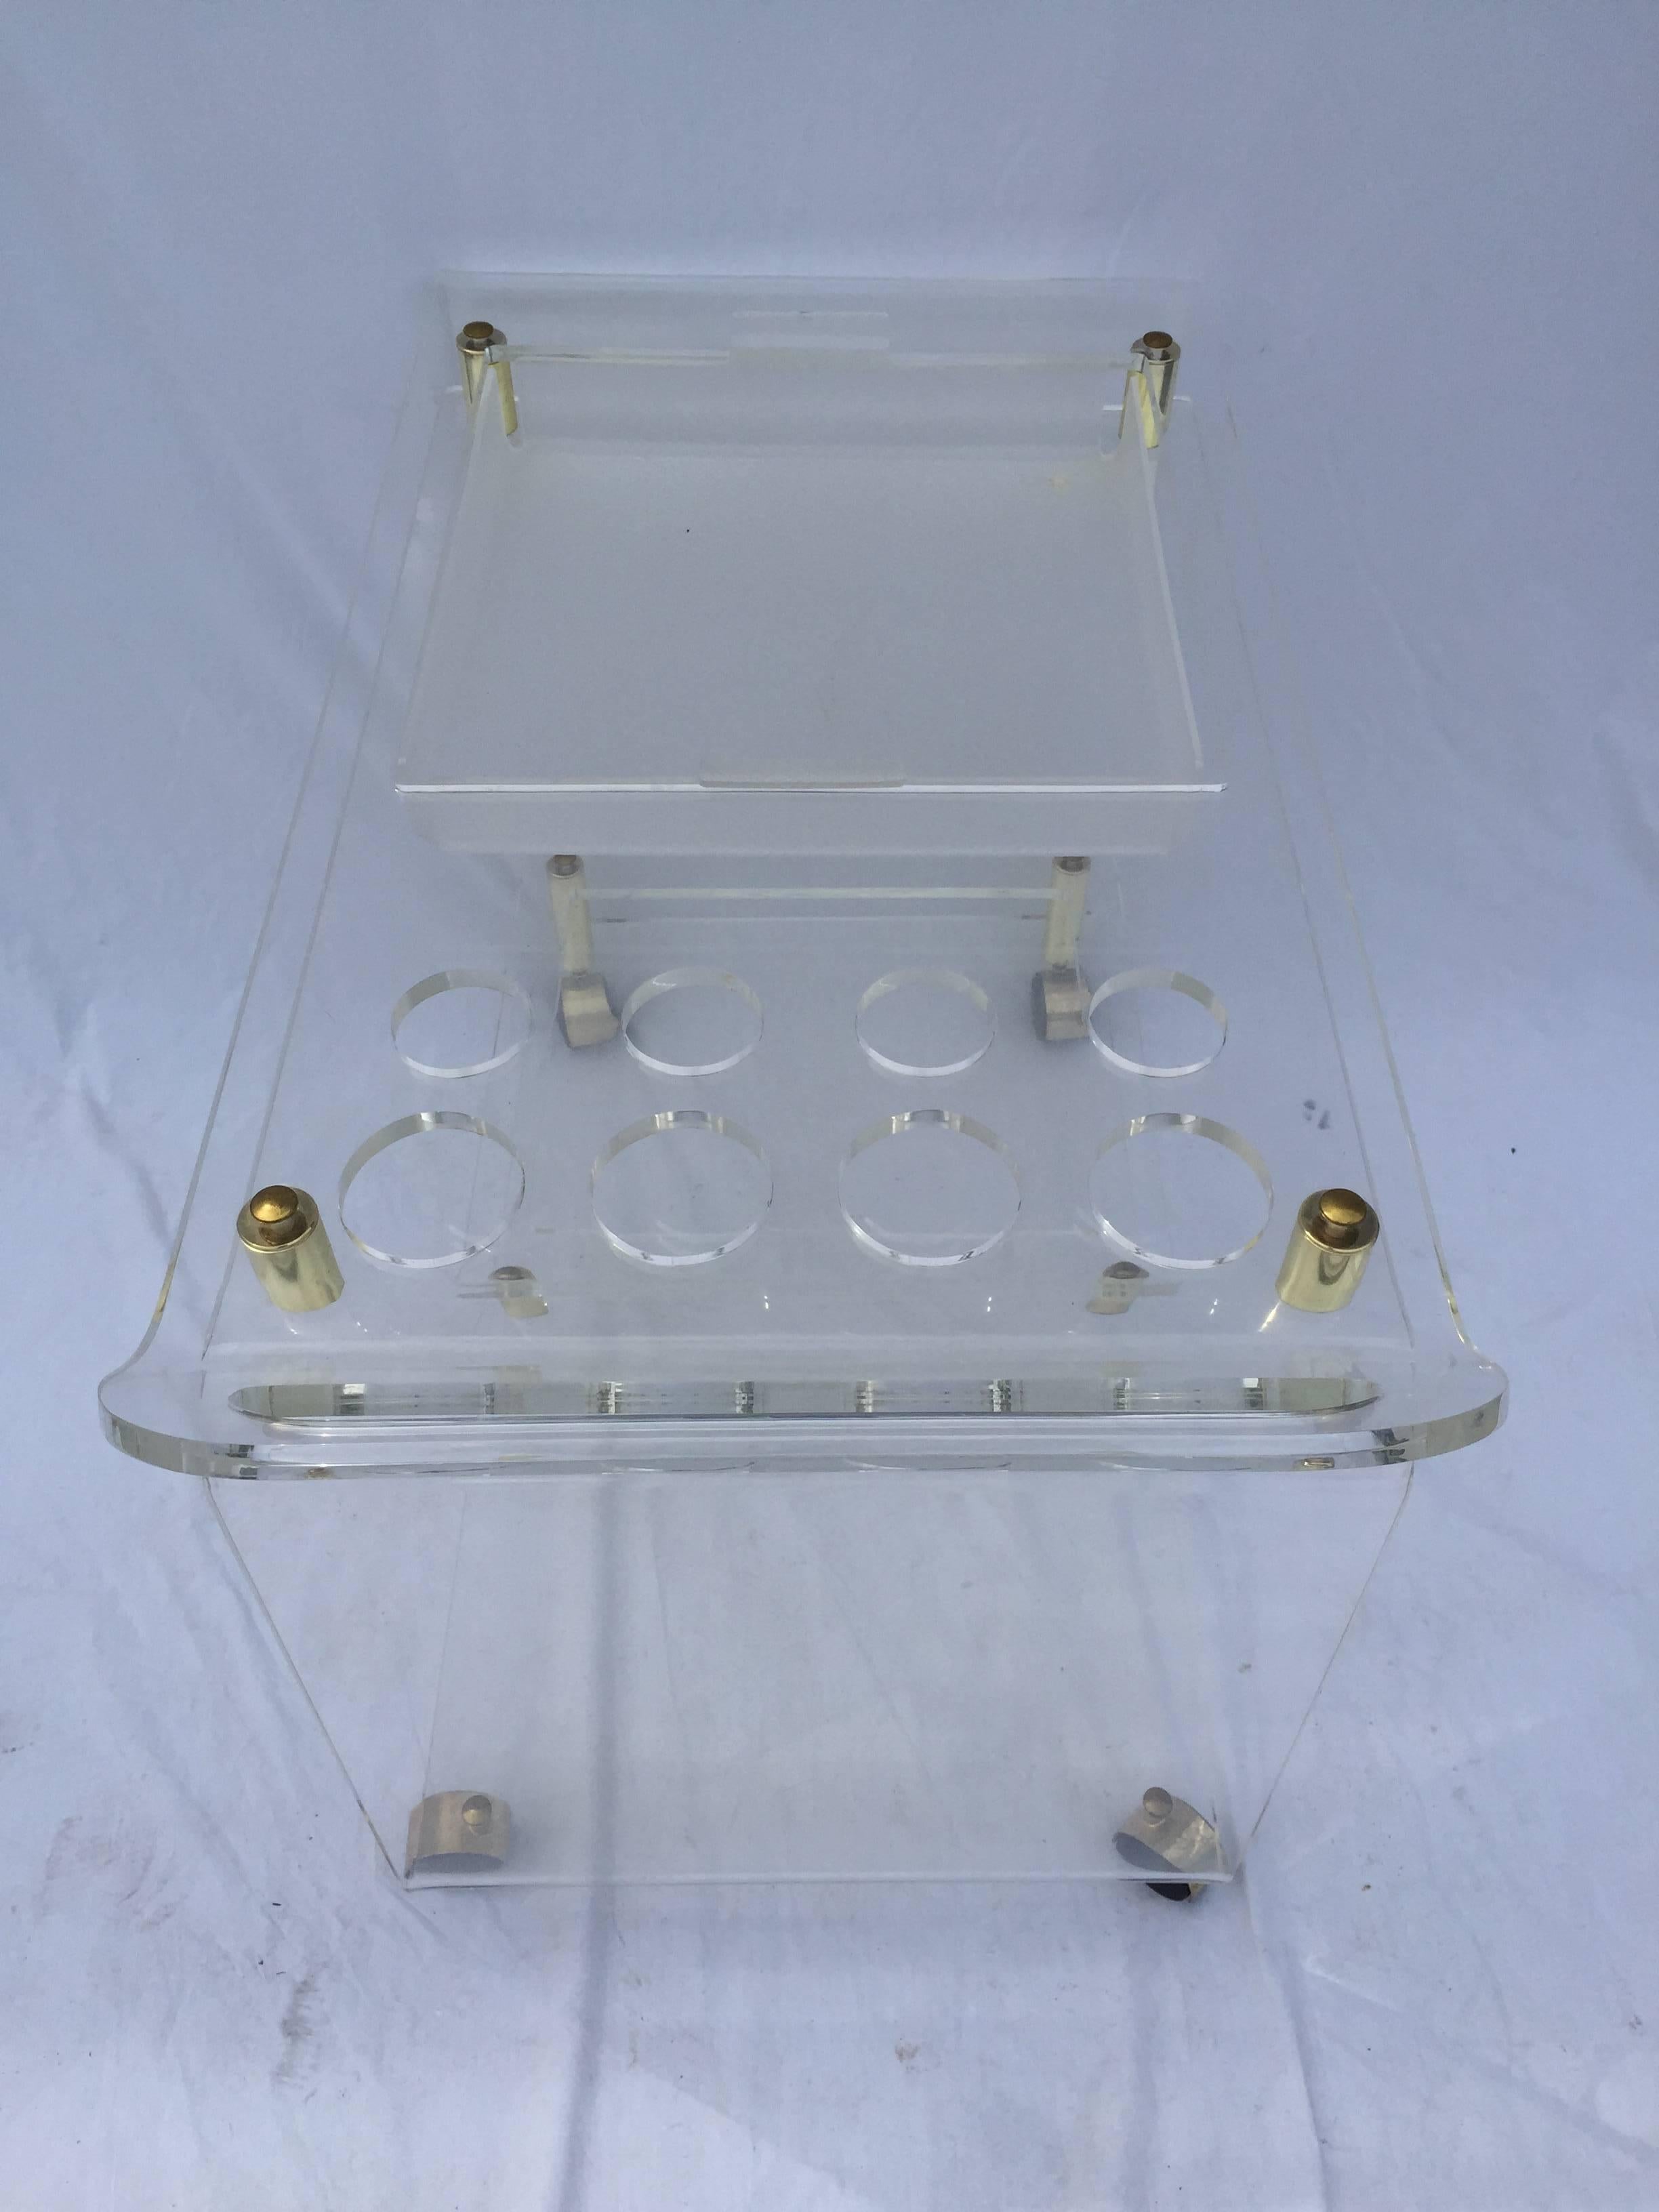 With ample room for glasses and bottles, a removable tray, brass accents and smooth rolling wheels - this vintage Lucite bar cart will make every cocktail that much more fun! Because, it's 5 o'clock somewhere! Cheers!